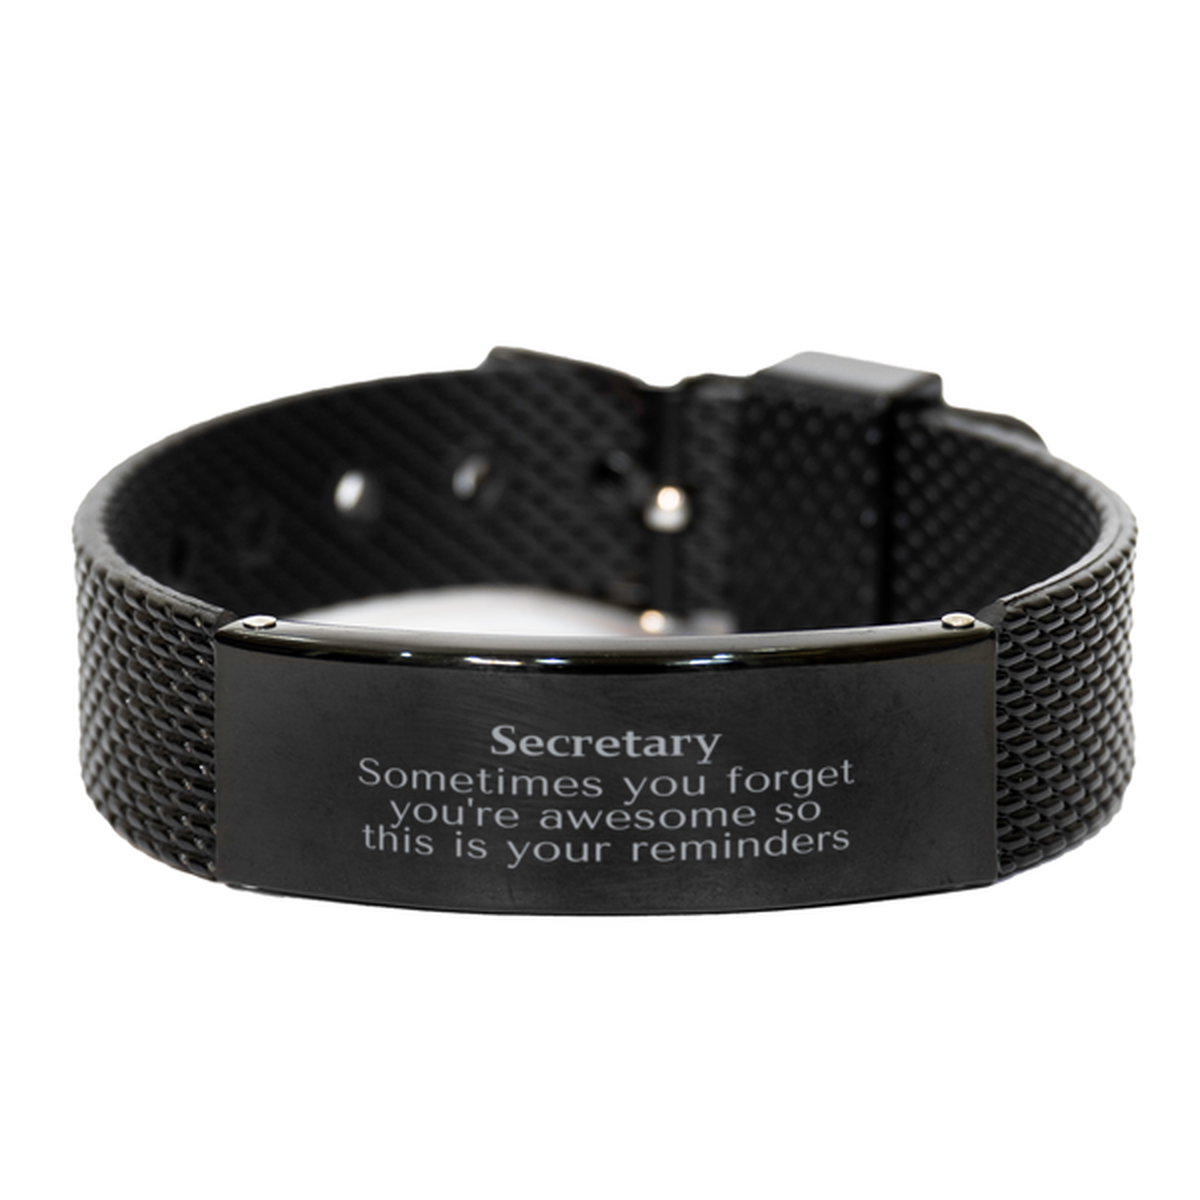 Sentimental Secretary Black Shark Mesh Bracelet, Secretary Sometimes you forget you're awesome so this is your reminders, Graduation Christmas Birthday Gifts for Secretary, Men, Women, Coworkers